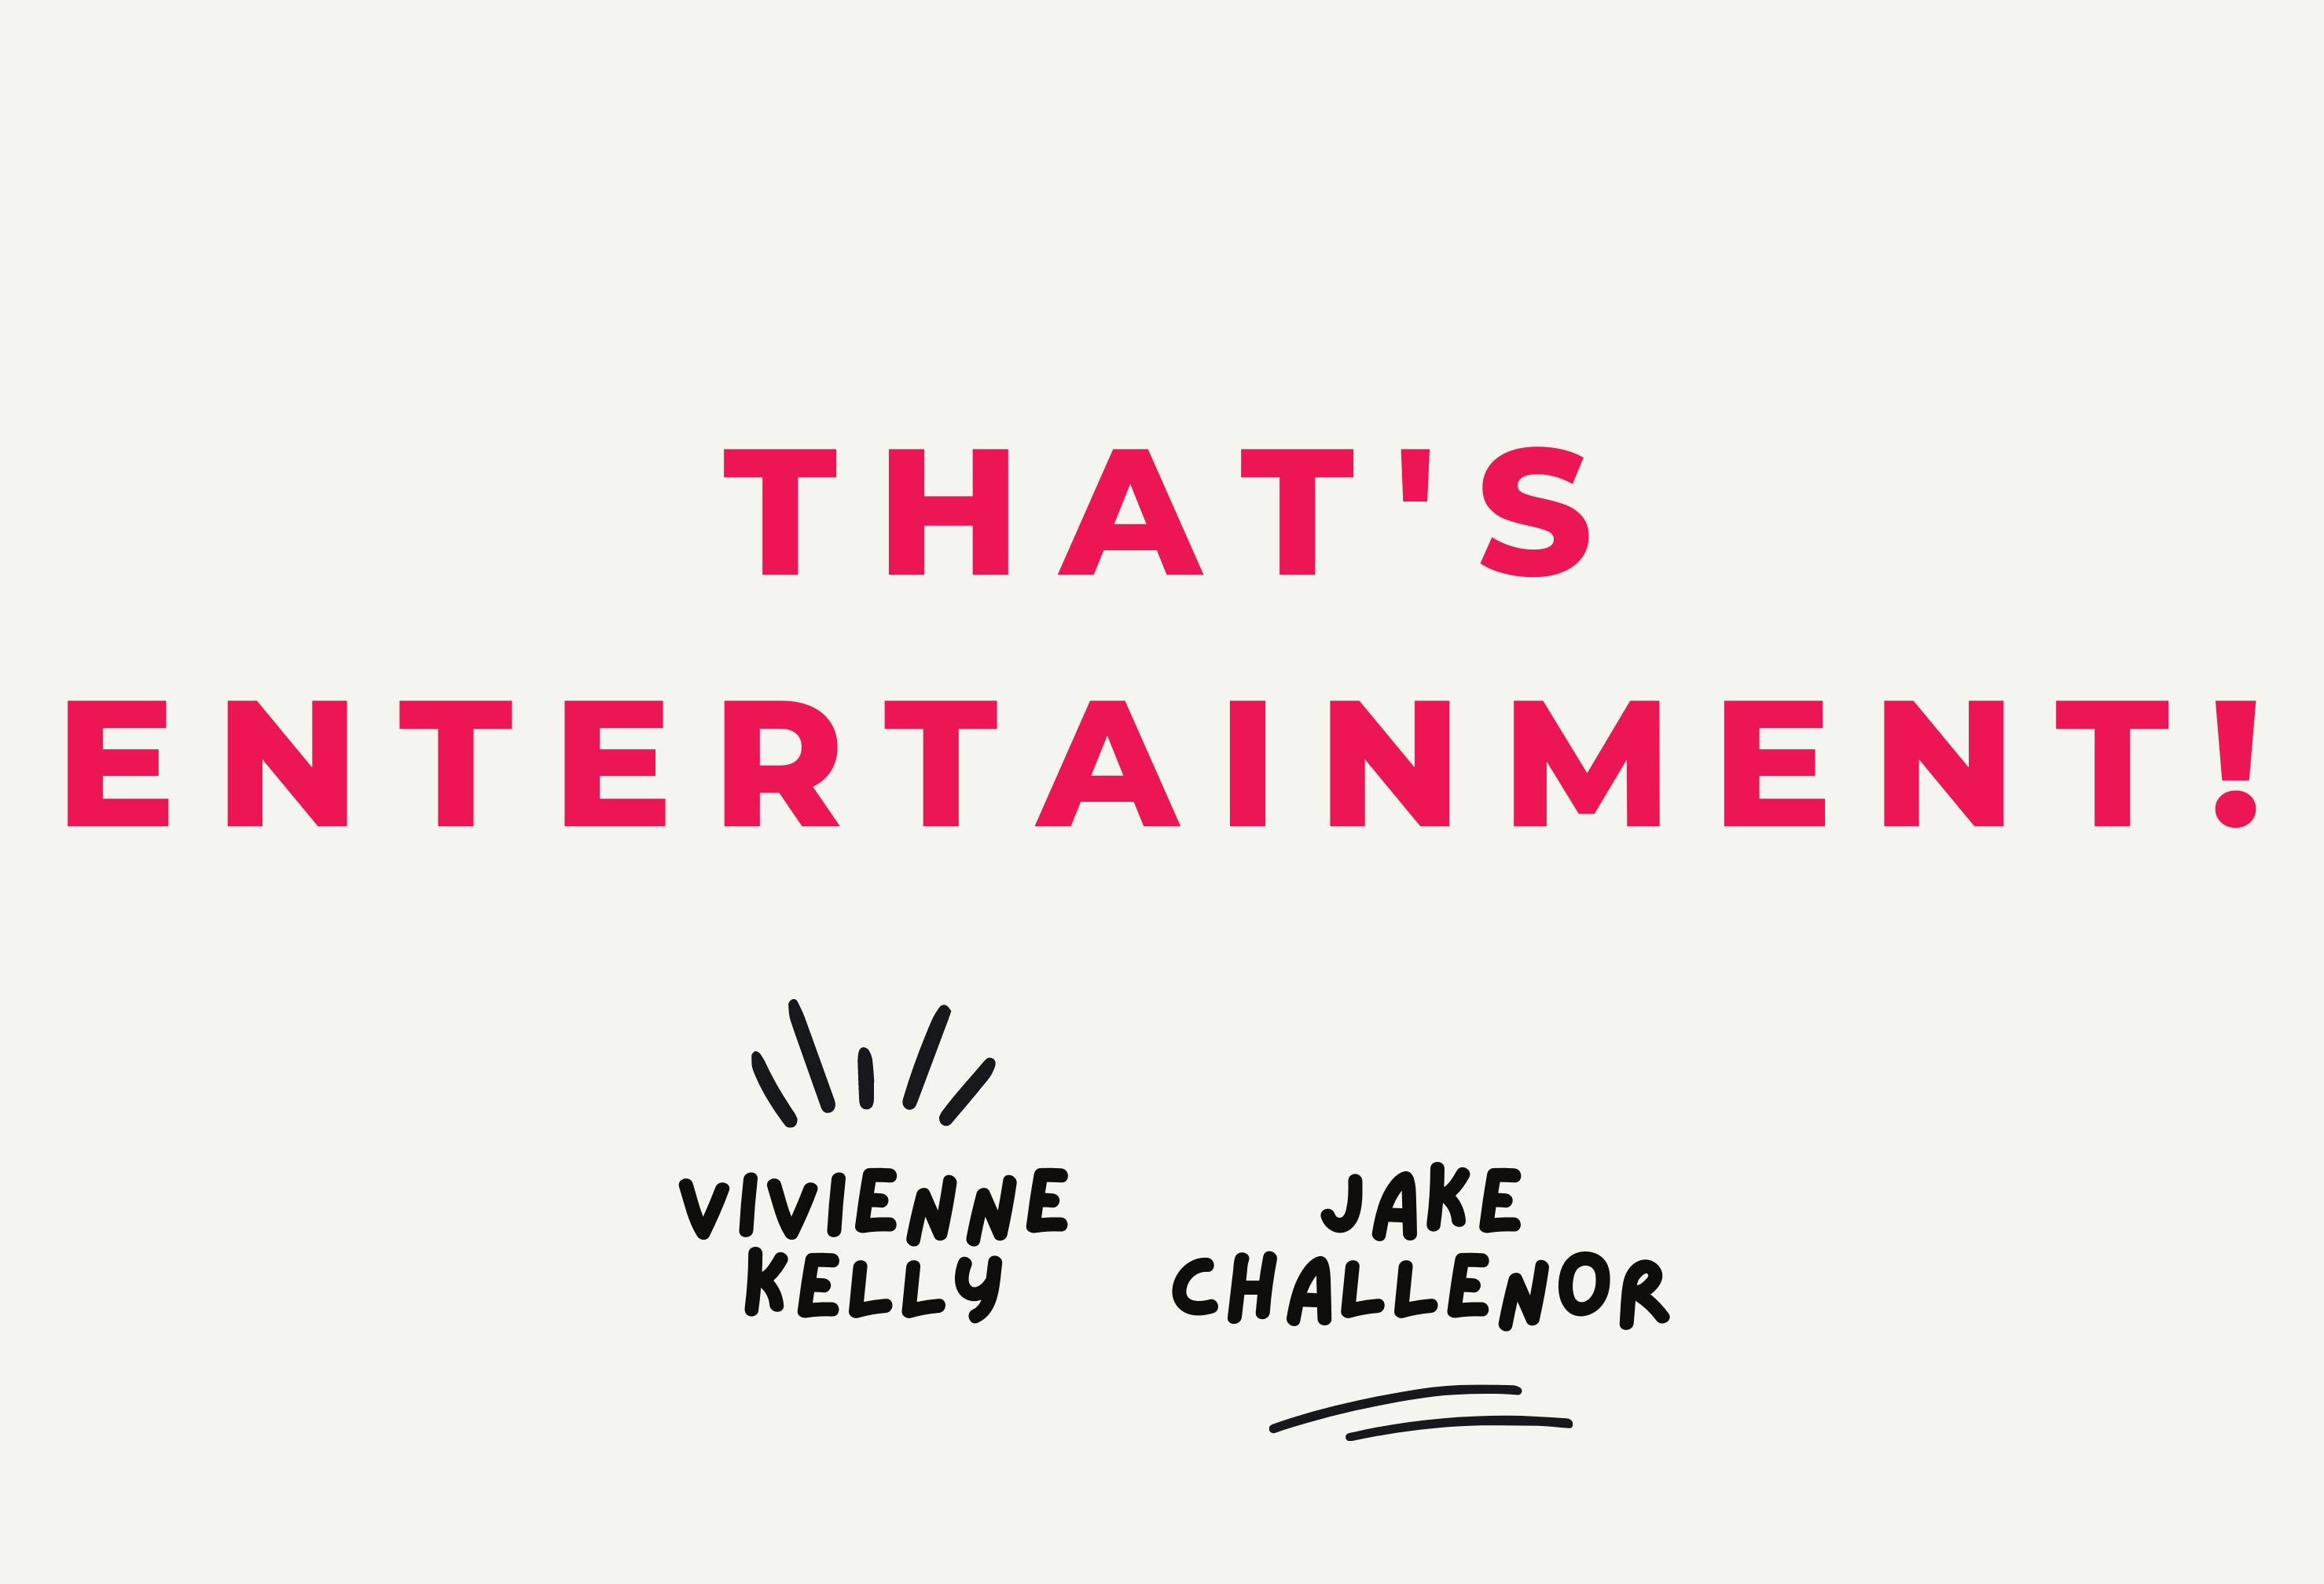 Listen to the first episode of Viv & Jake’s new podcast, That’s Entertainment!